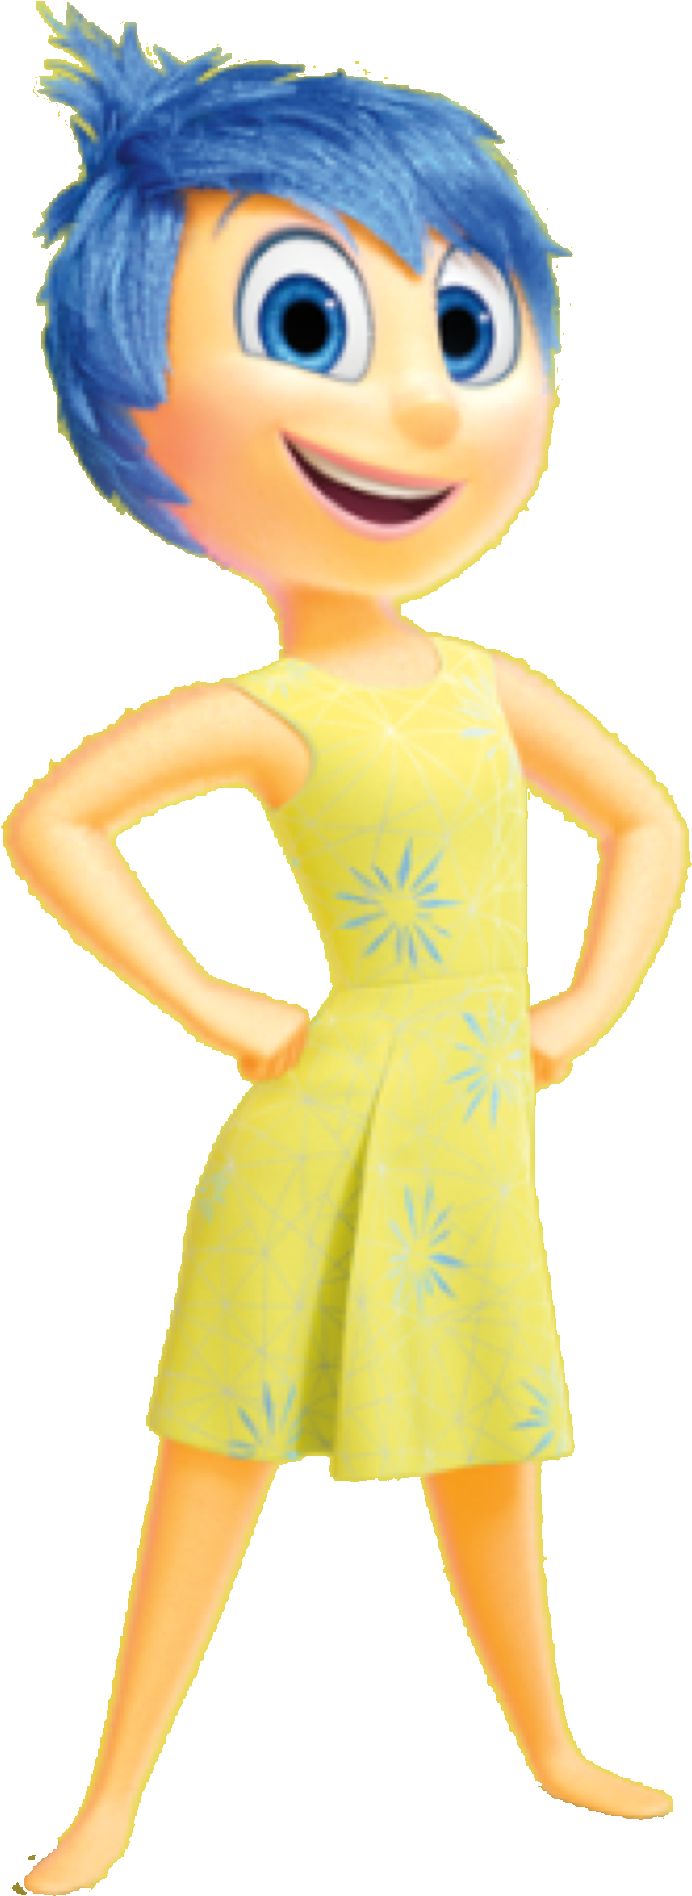 A Cartoon Character In A Yellow Dress